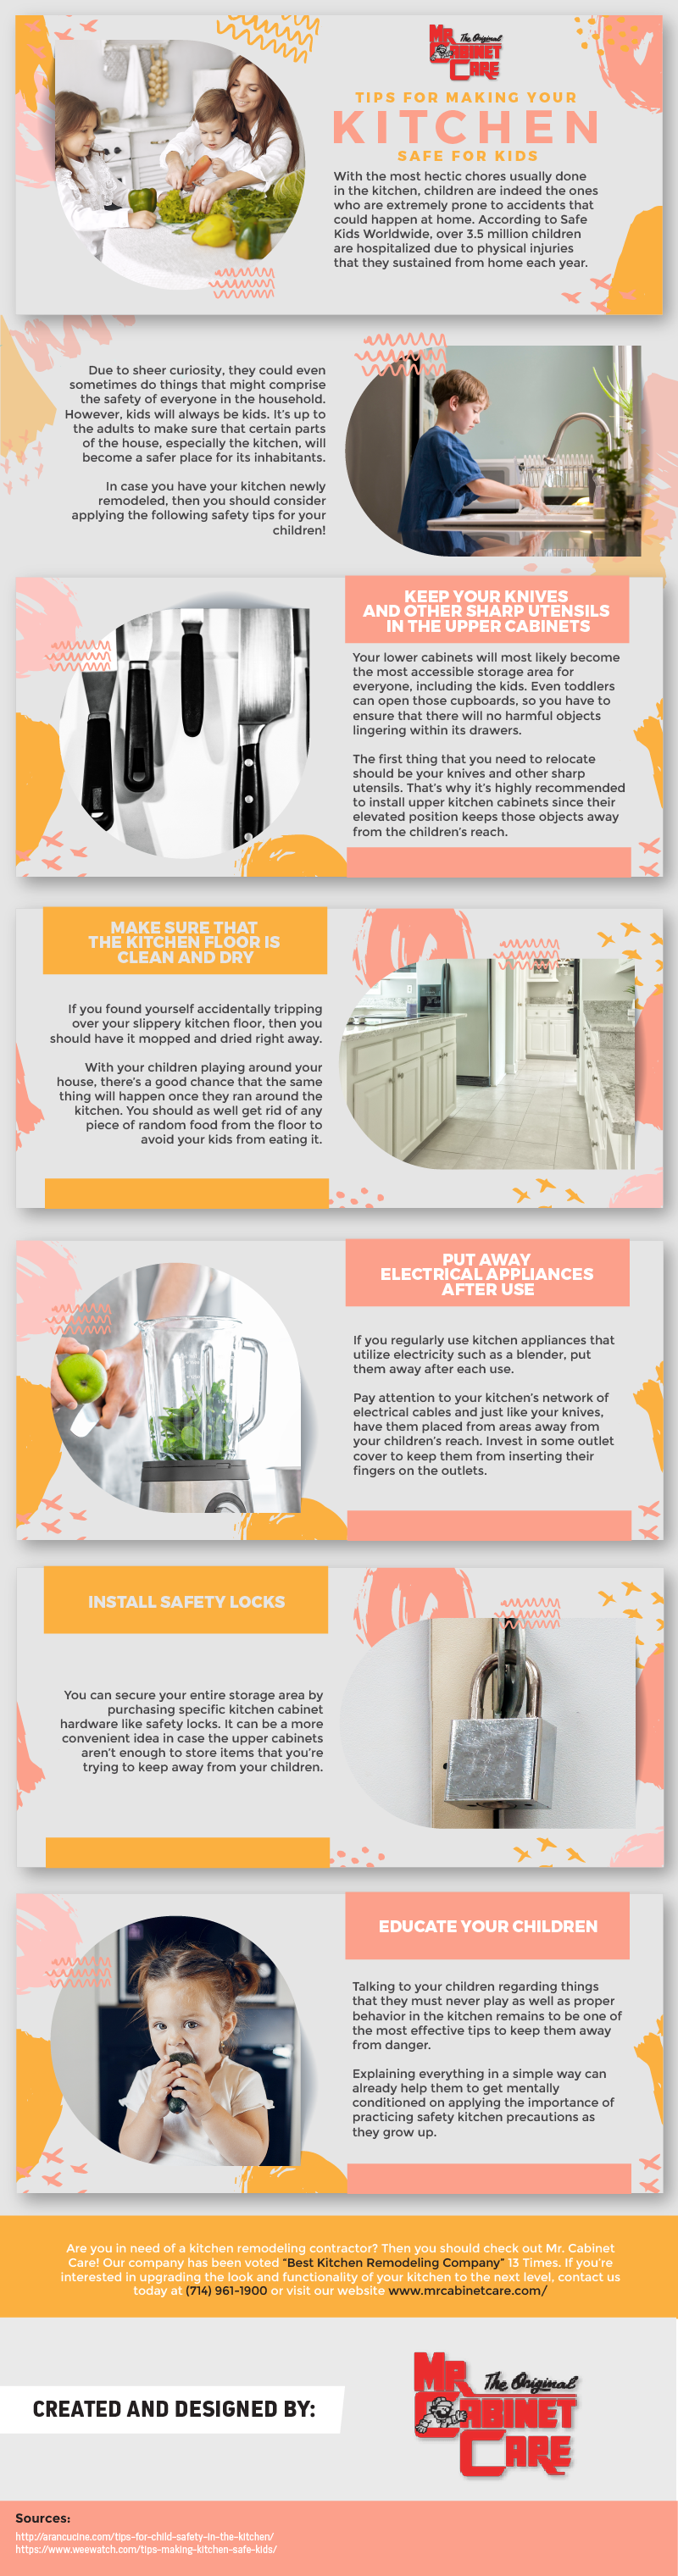 Tips for Making Your Kitchen Safe for Kids - Infographic